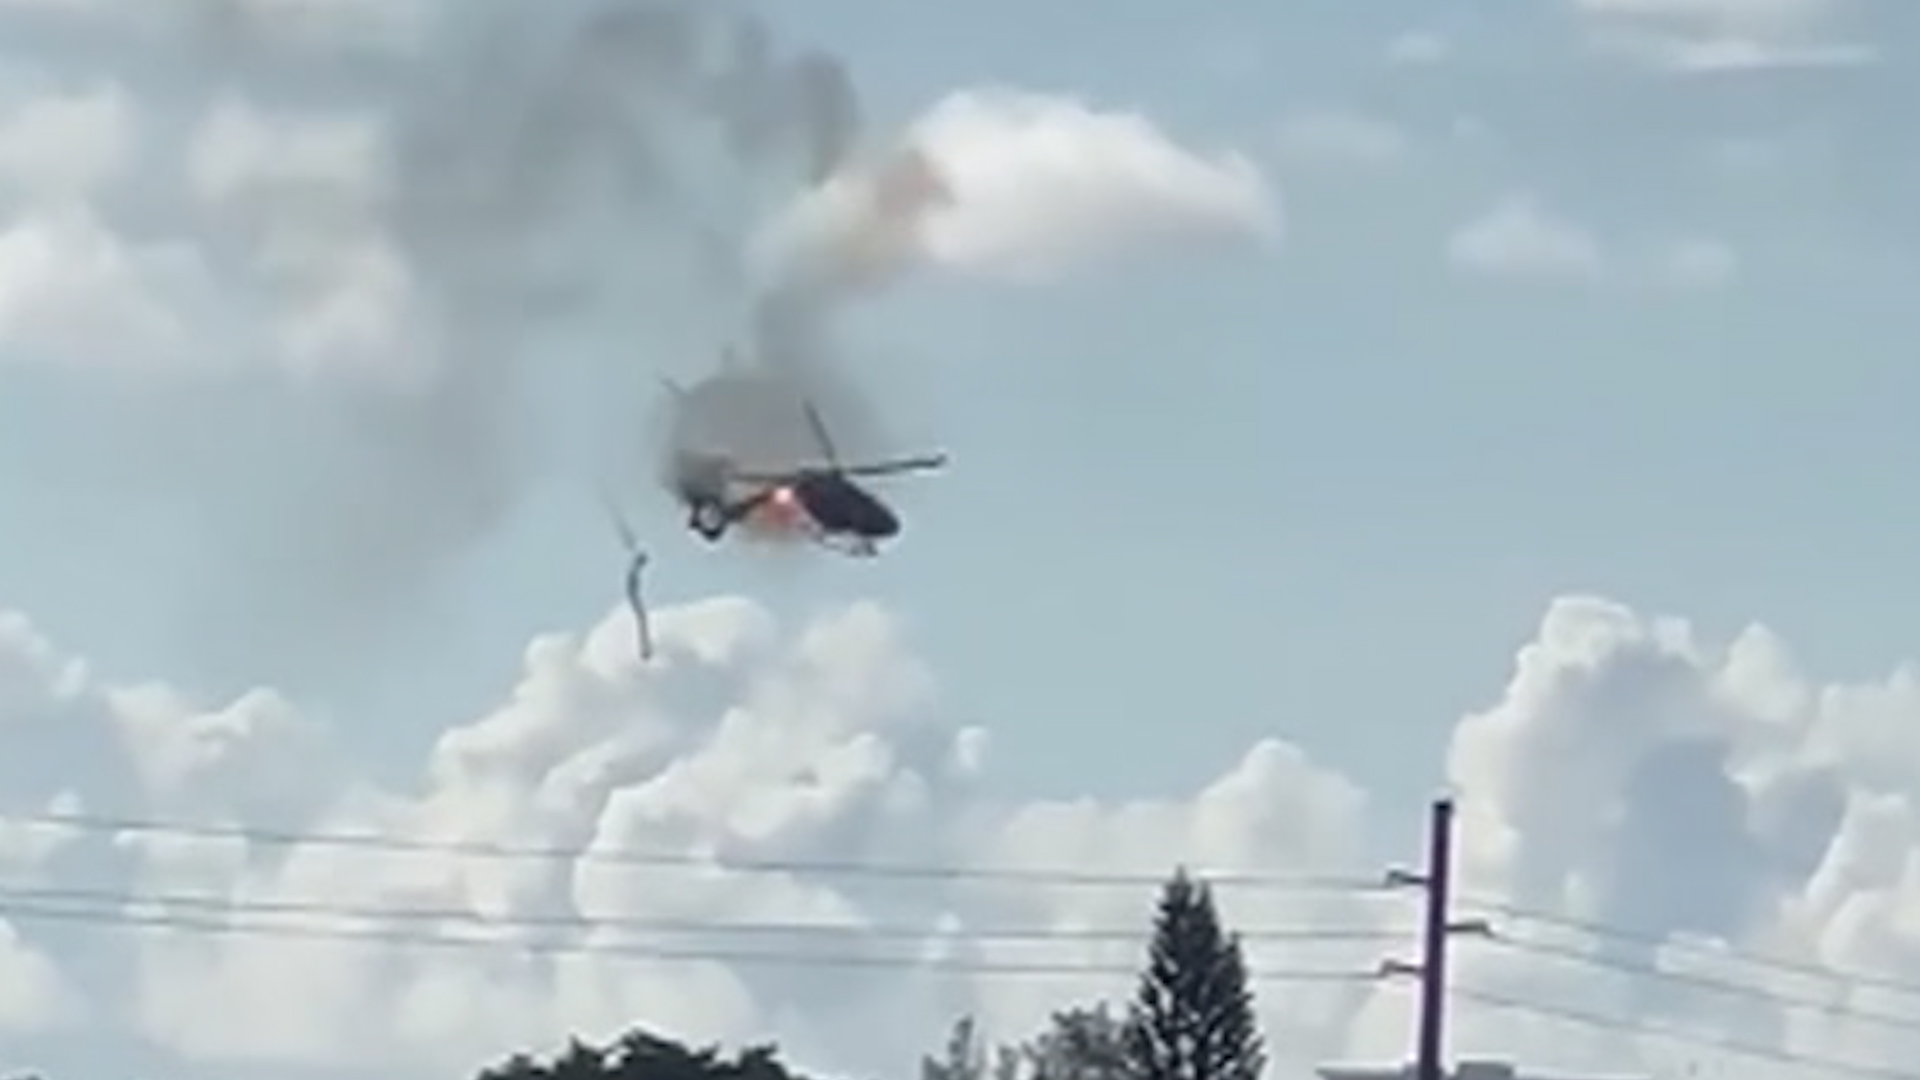 Watch the moment a BSO Fire Rescue helicopter crashes in Pompano Beach picture